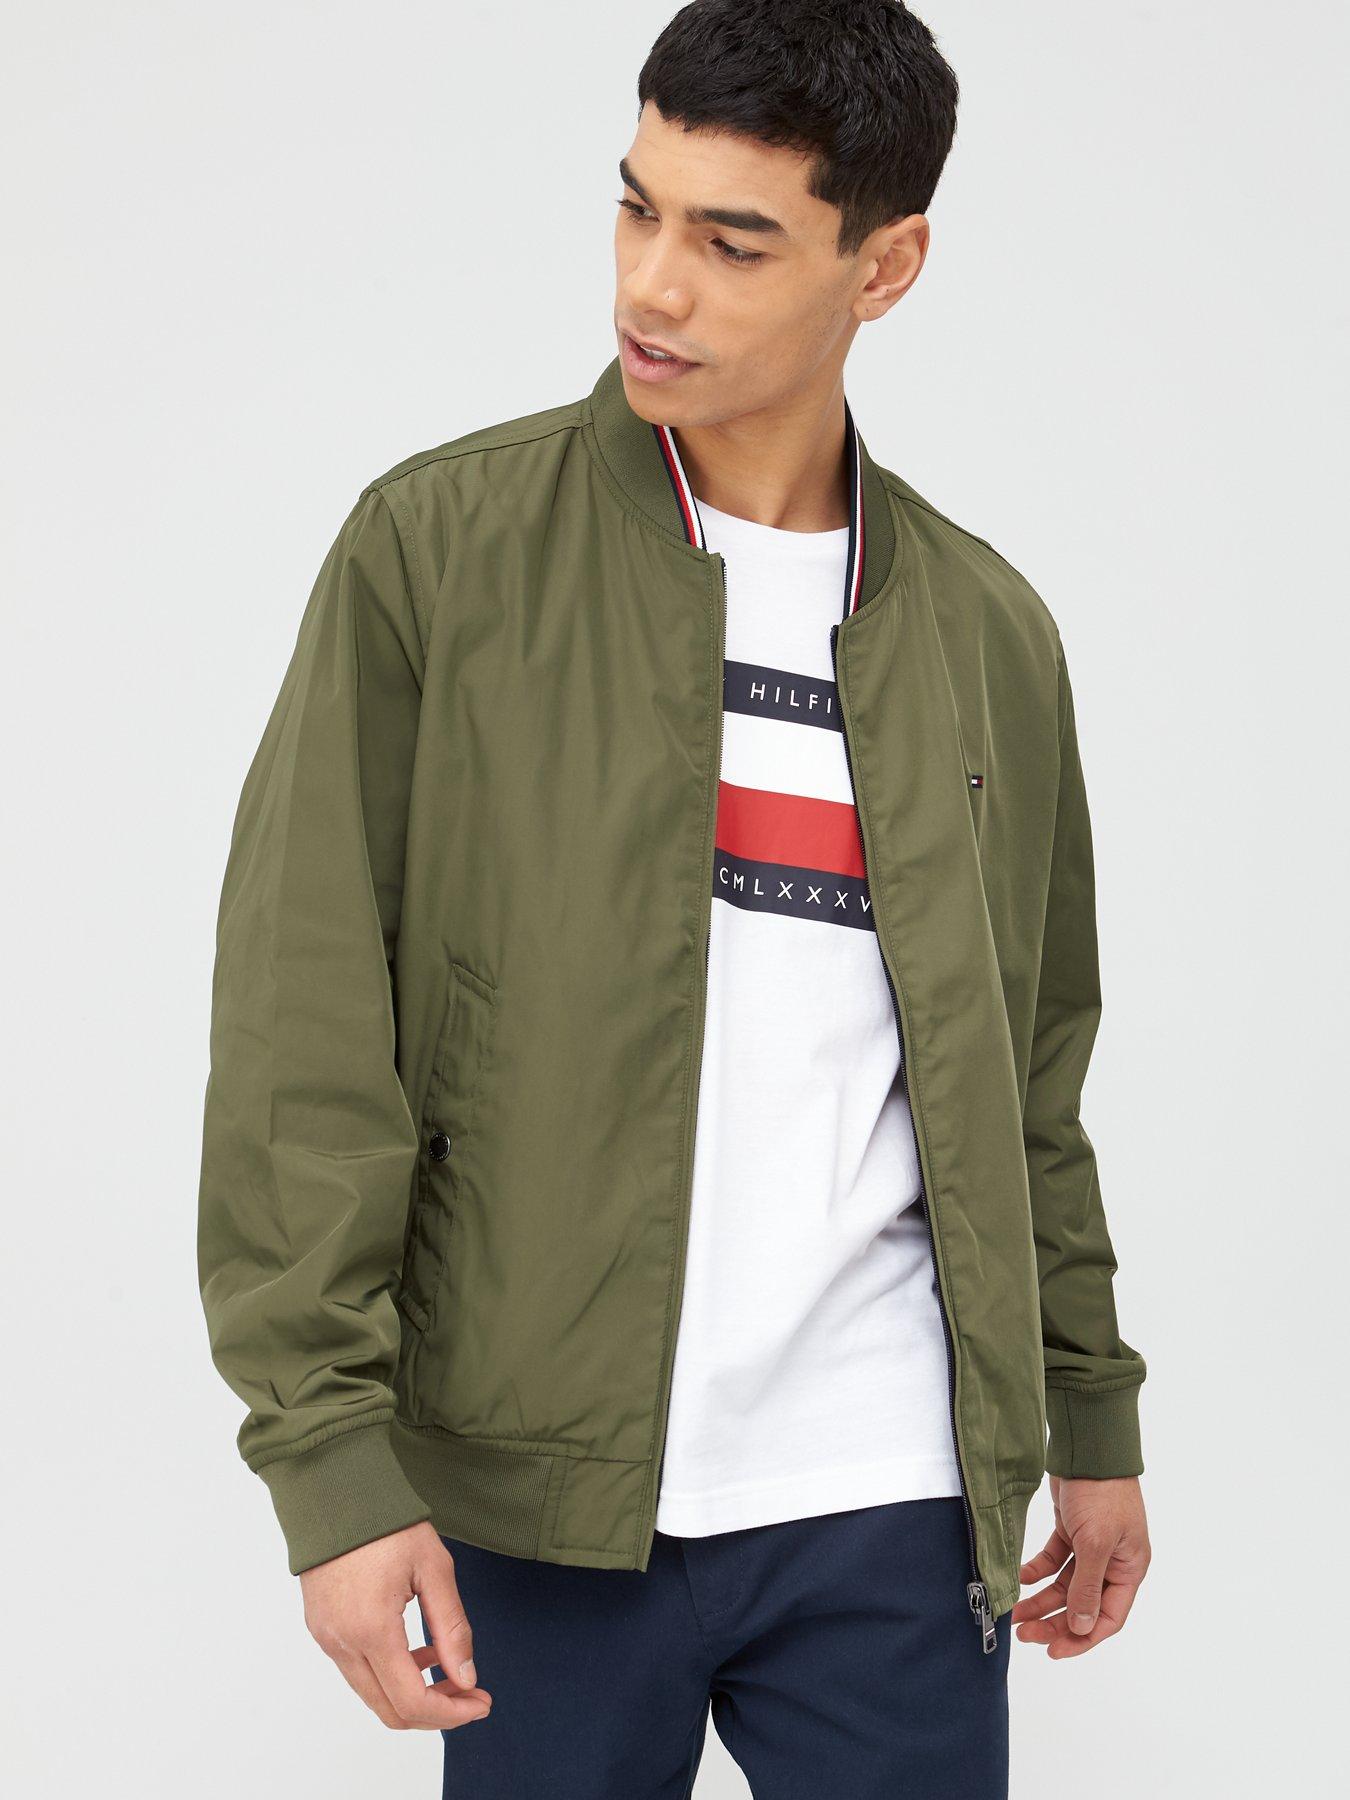 tommy hilfiger double sided jacket